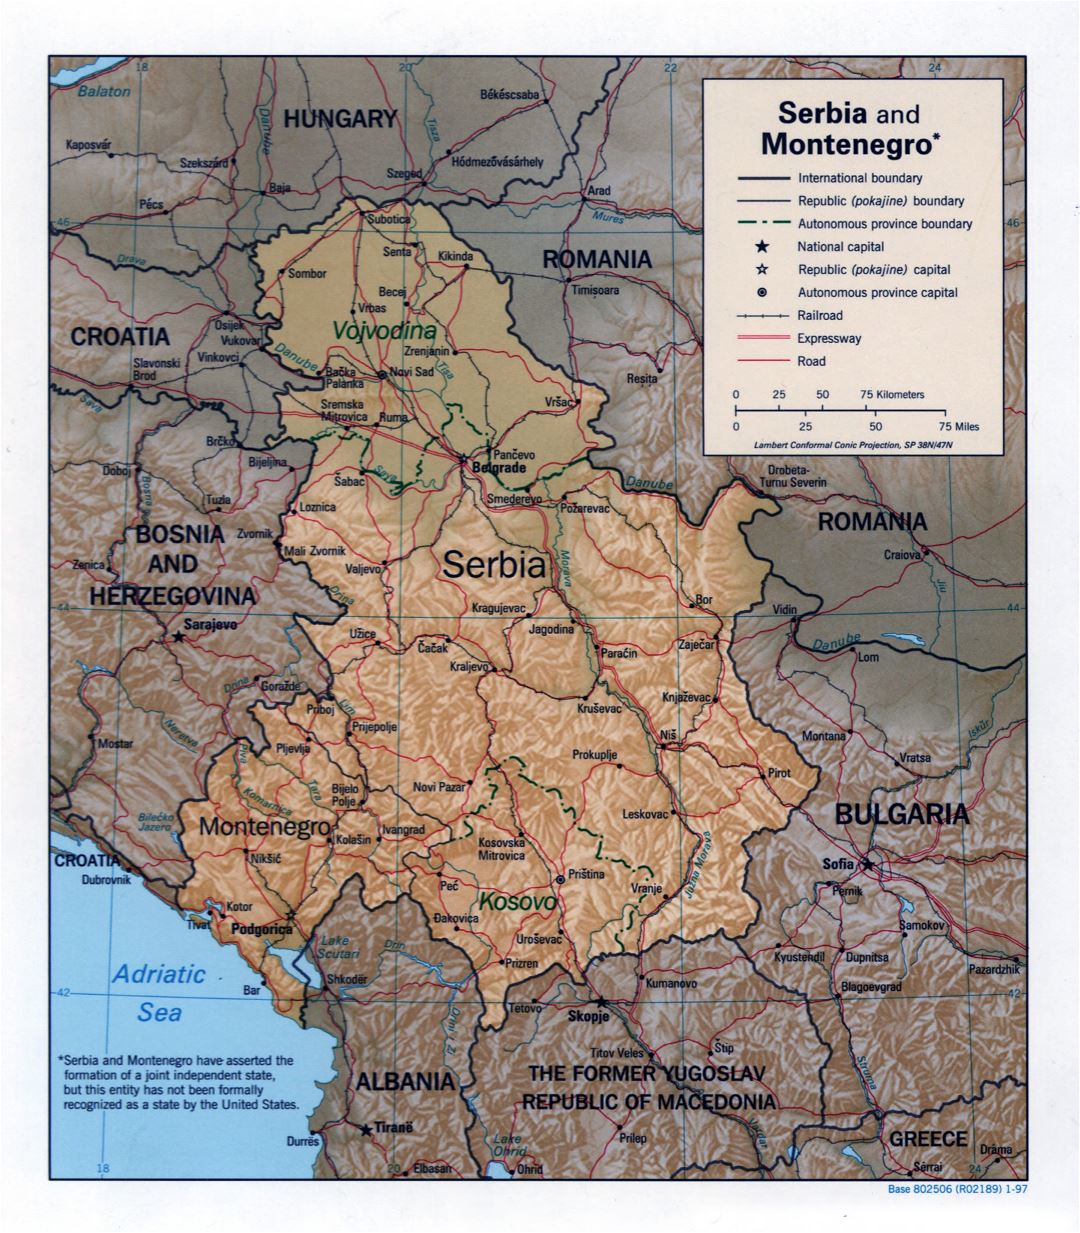 Large scale political map of Serbia and Montenegro with relief, roads, railroads and major cities - 1997